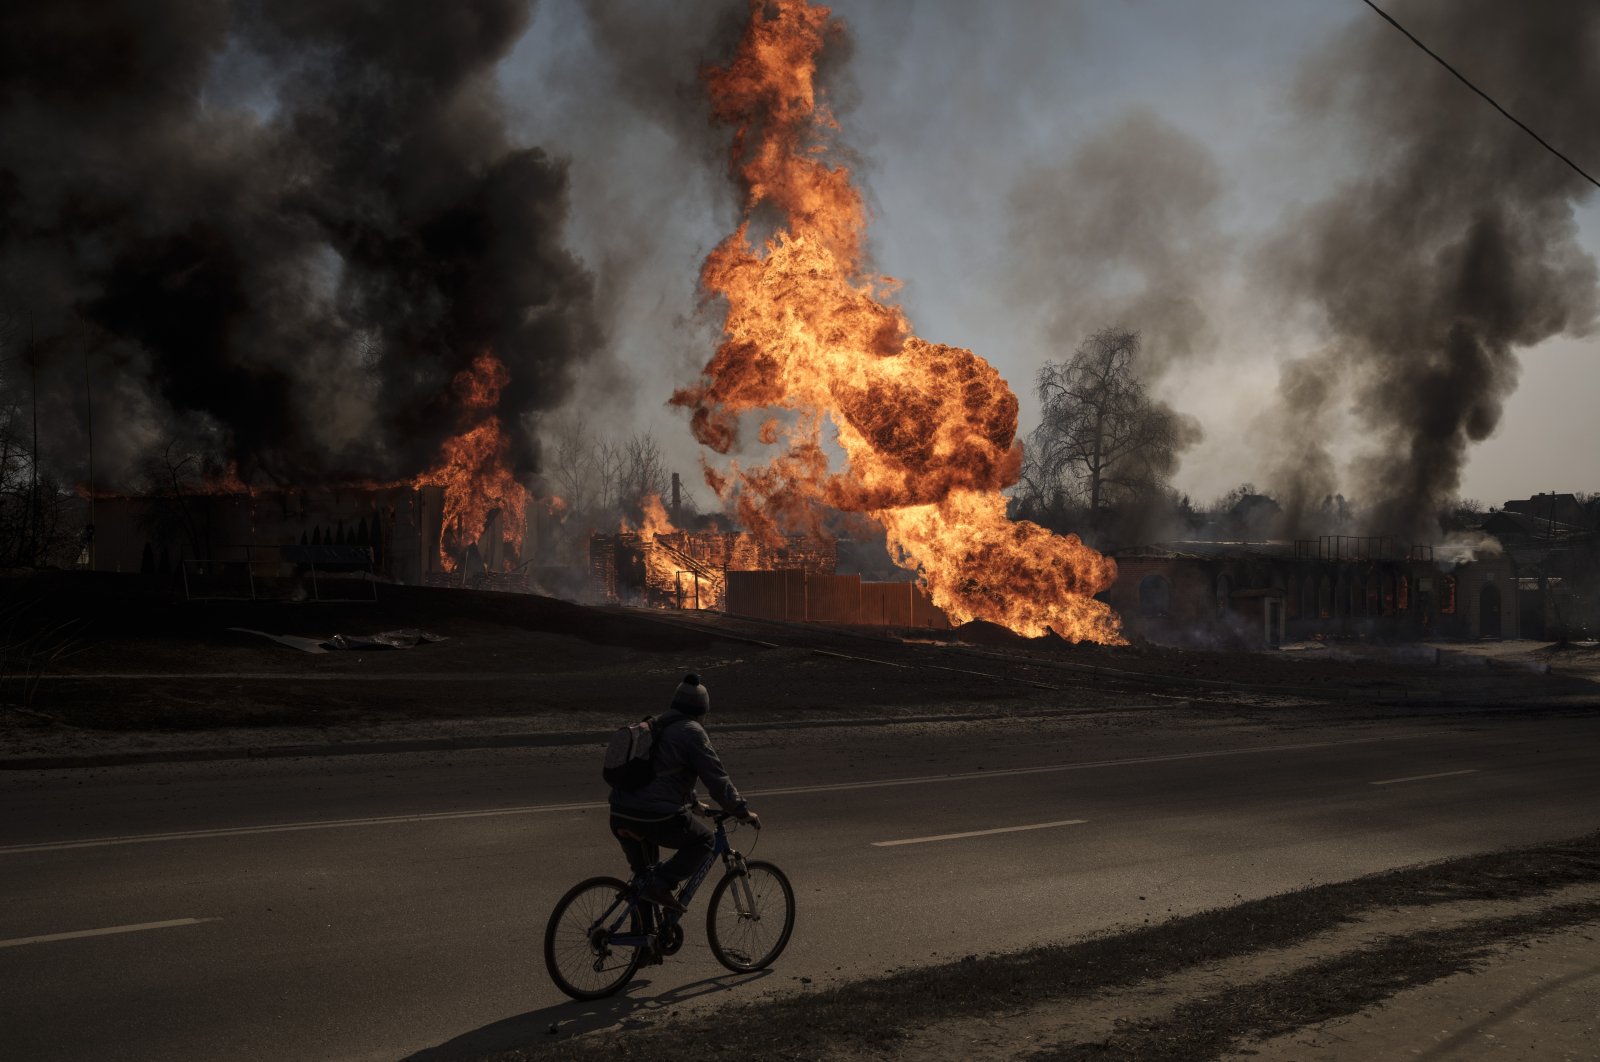 A man rides his bike past flames and smoke rising from a fire following a Russian attack in Kharkiv, Ukraine, March 25, 2022. (AP Photo)